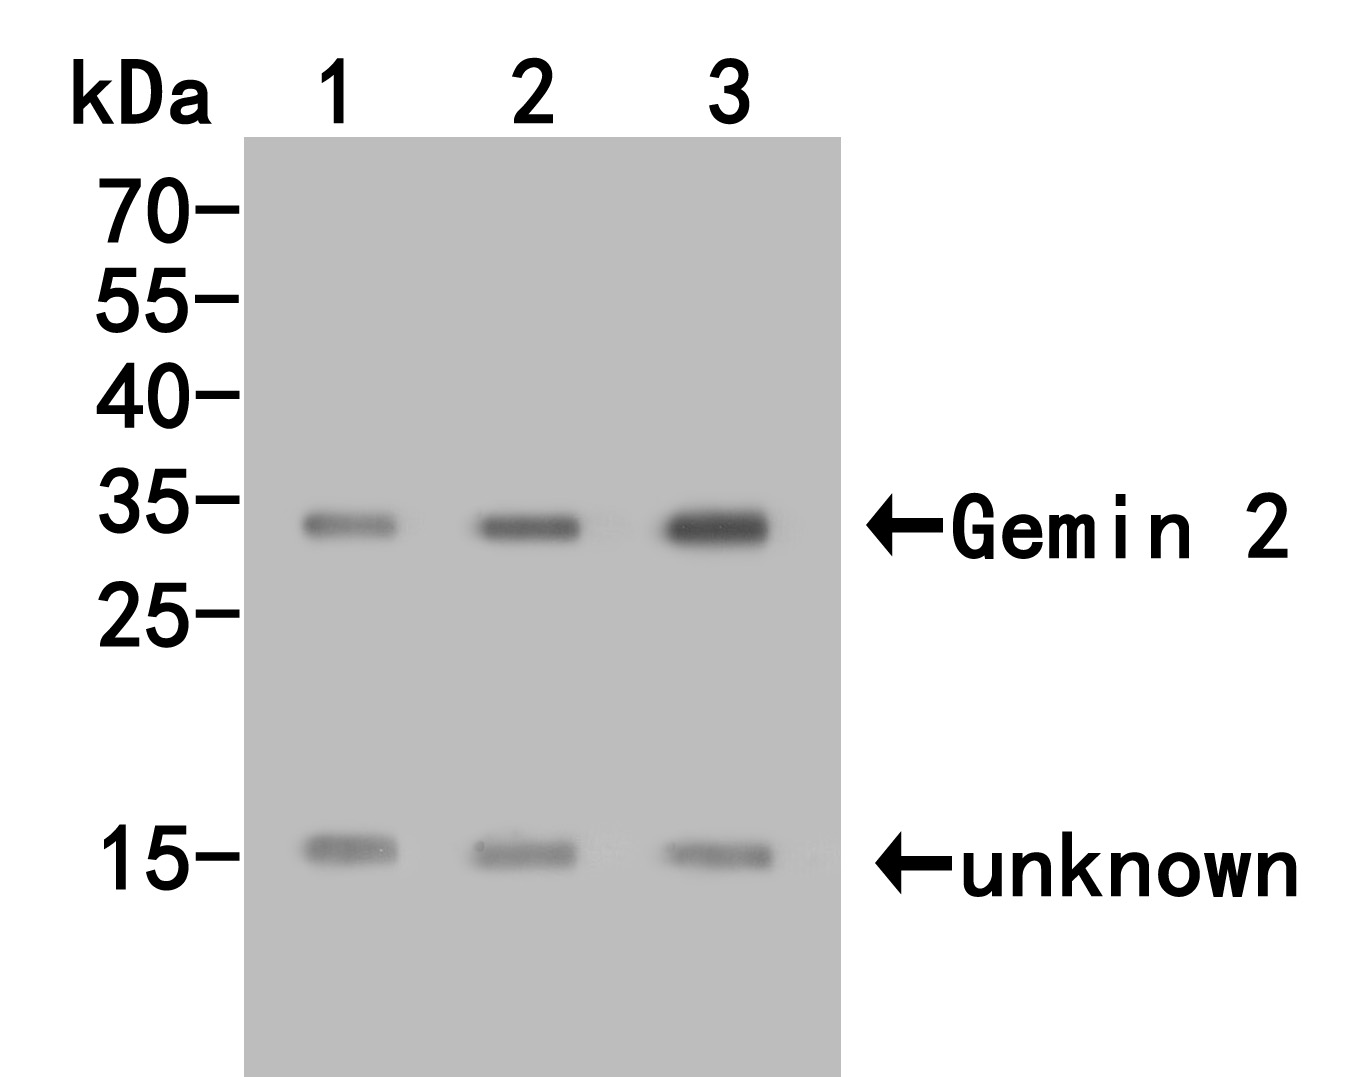 Western blot analysis of Gemin 2 on different lysates. Proteins were transferred to a PVDF membrane and blocked with 5% BSA in PBS for 1 hour at room temperature. The primary antibody (HA500045, 1/500) was used in 5% BSA at room temperature for 2 hours. Goat Anti-Rabbit IgG - HRP Secondary Antibody (HA1001) at 1:5,000 dilution was used for 1 hour at room temperature.<br />
Positive control: <br />
Lane 1: Hela cell lysate<br />
Lane 2: Jurkat cell lysate<br />
Lane 2: 293T cell lysate